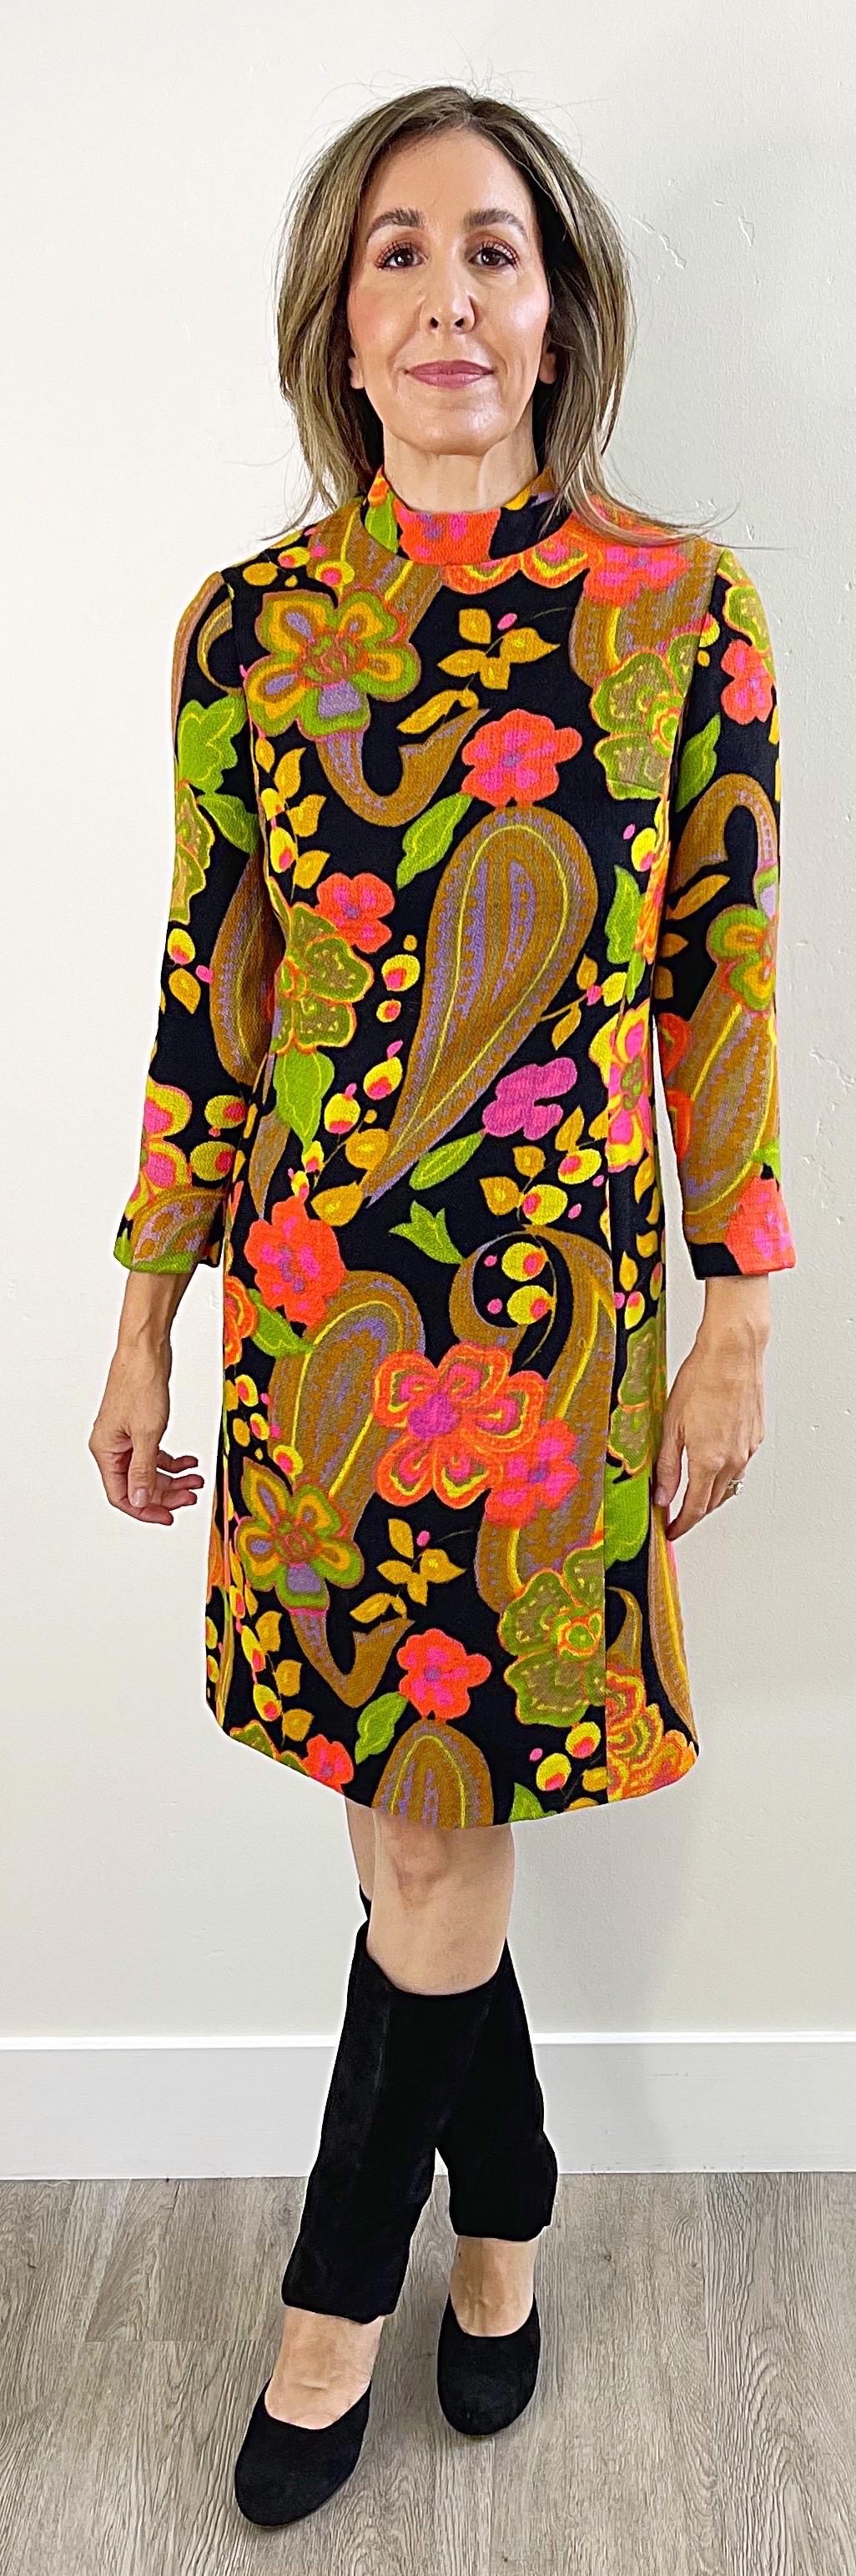 Chic long sleeve flower power and paisley print dress ! Features a tailored bodice with full metal zipper up the back and button closure. POCKETS at each side of the waist. Very well made, with heavy attention to details. The pictured early 2000s